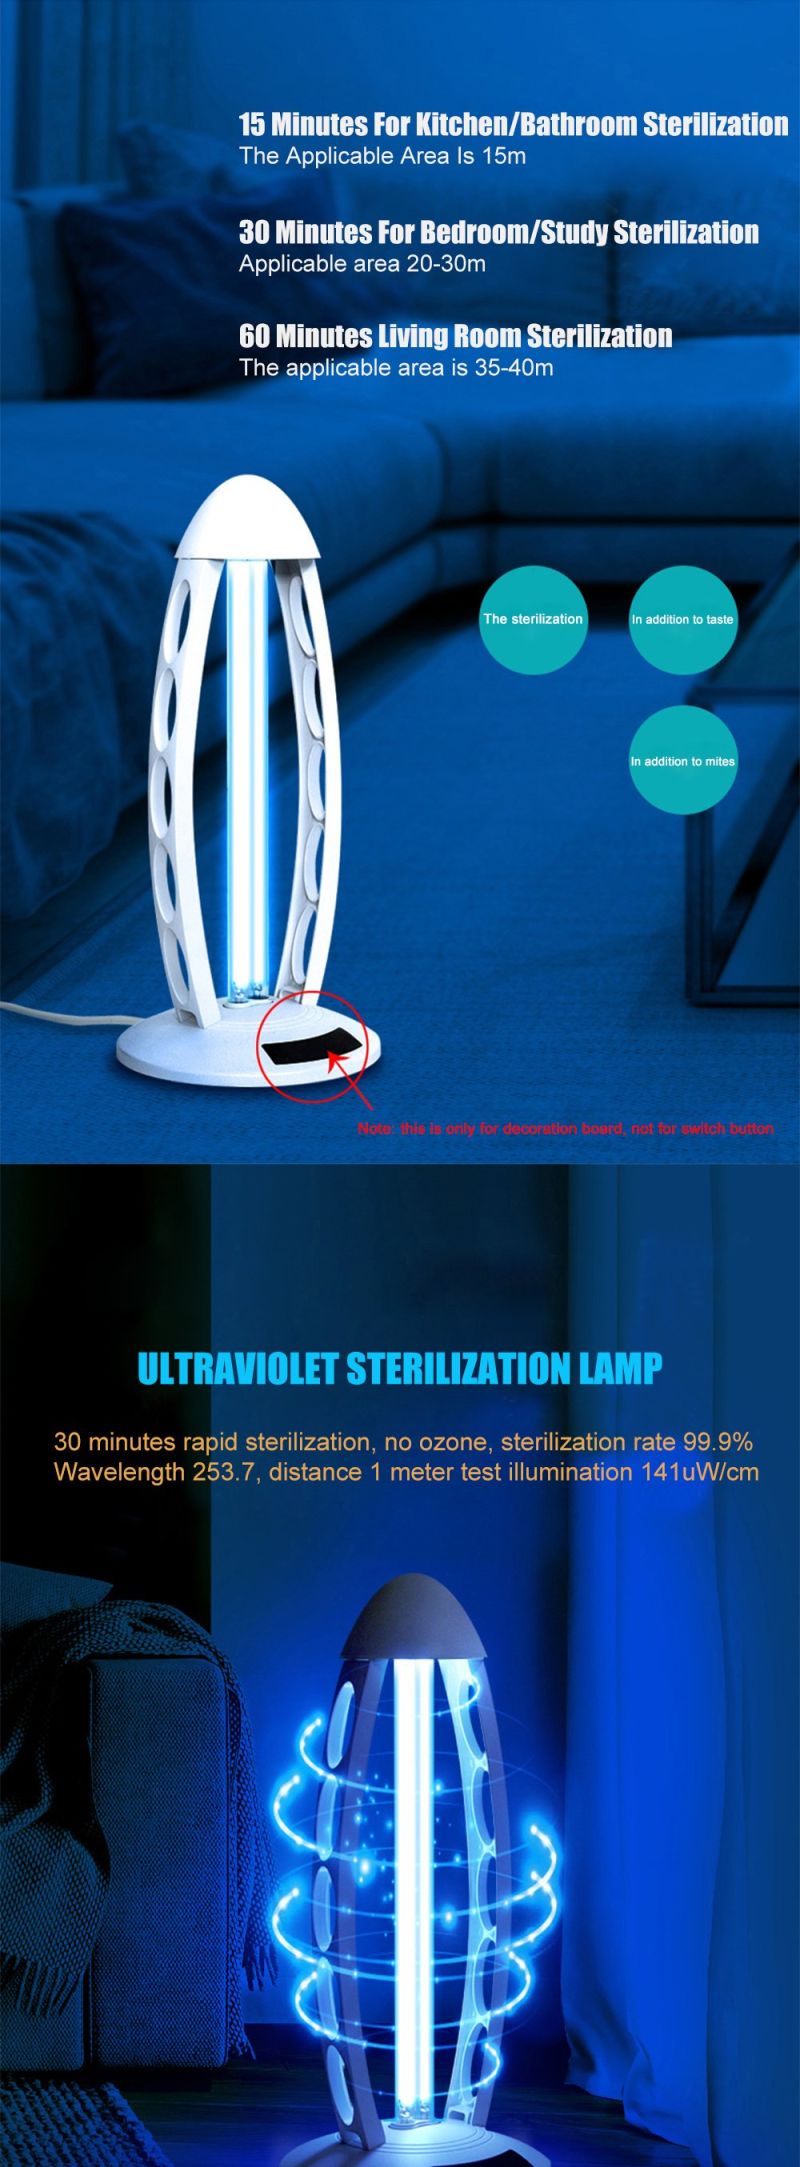 Best Factory Price ODM Disinfection Germicidal Lamp UV Sanitizer at Home Multifunction UVC Sterilier Lamp